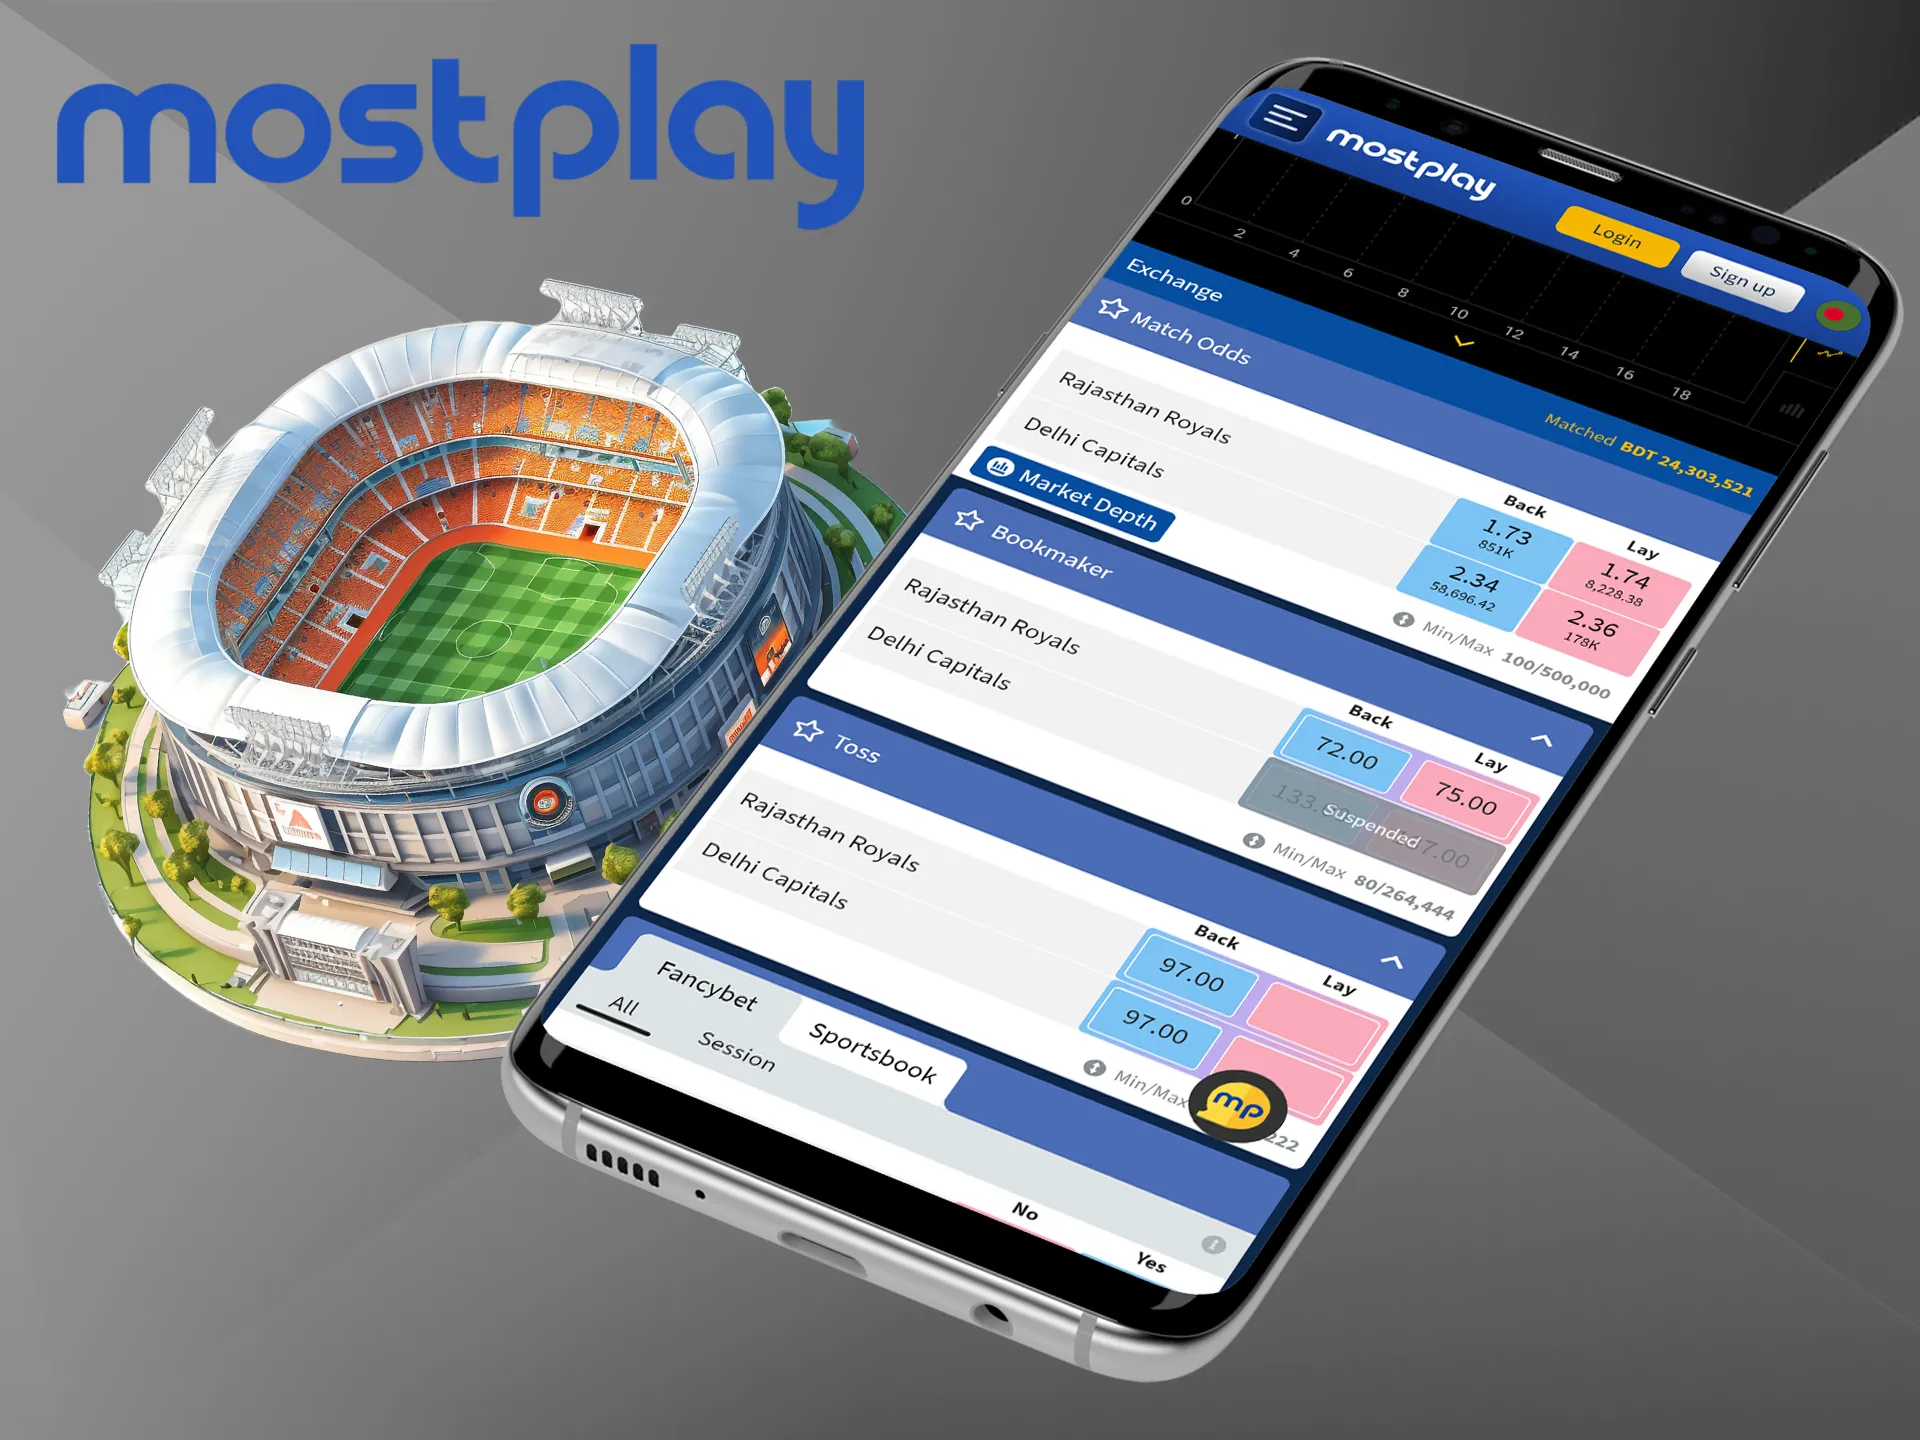 Choose the handicap option to make your cricket betting at Mostplay more profitable and exciting.